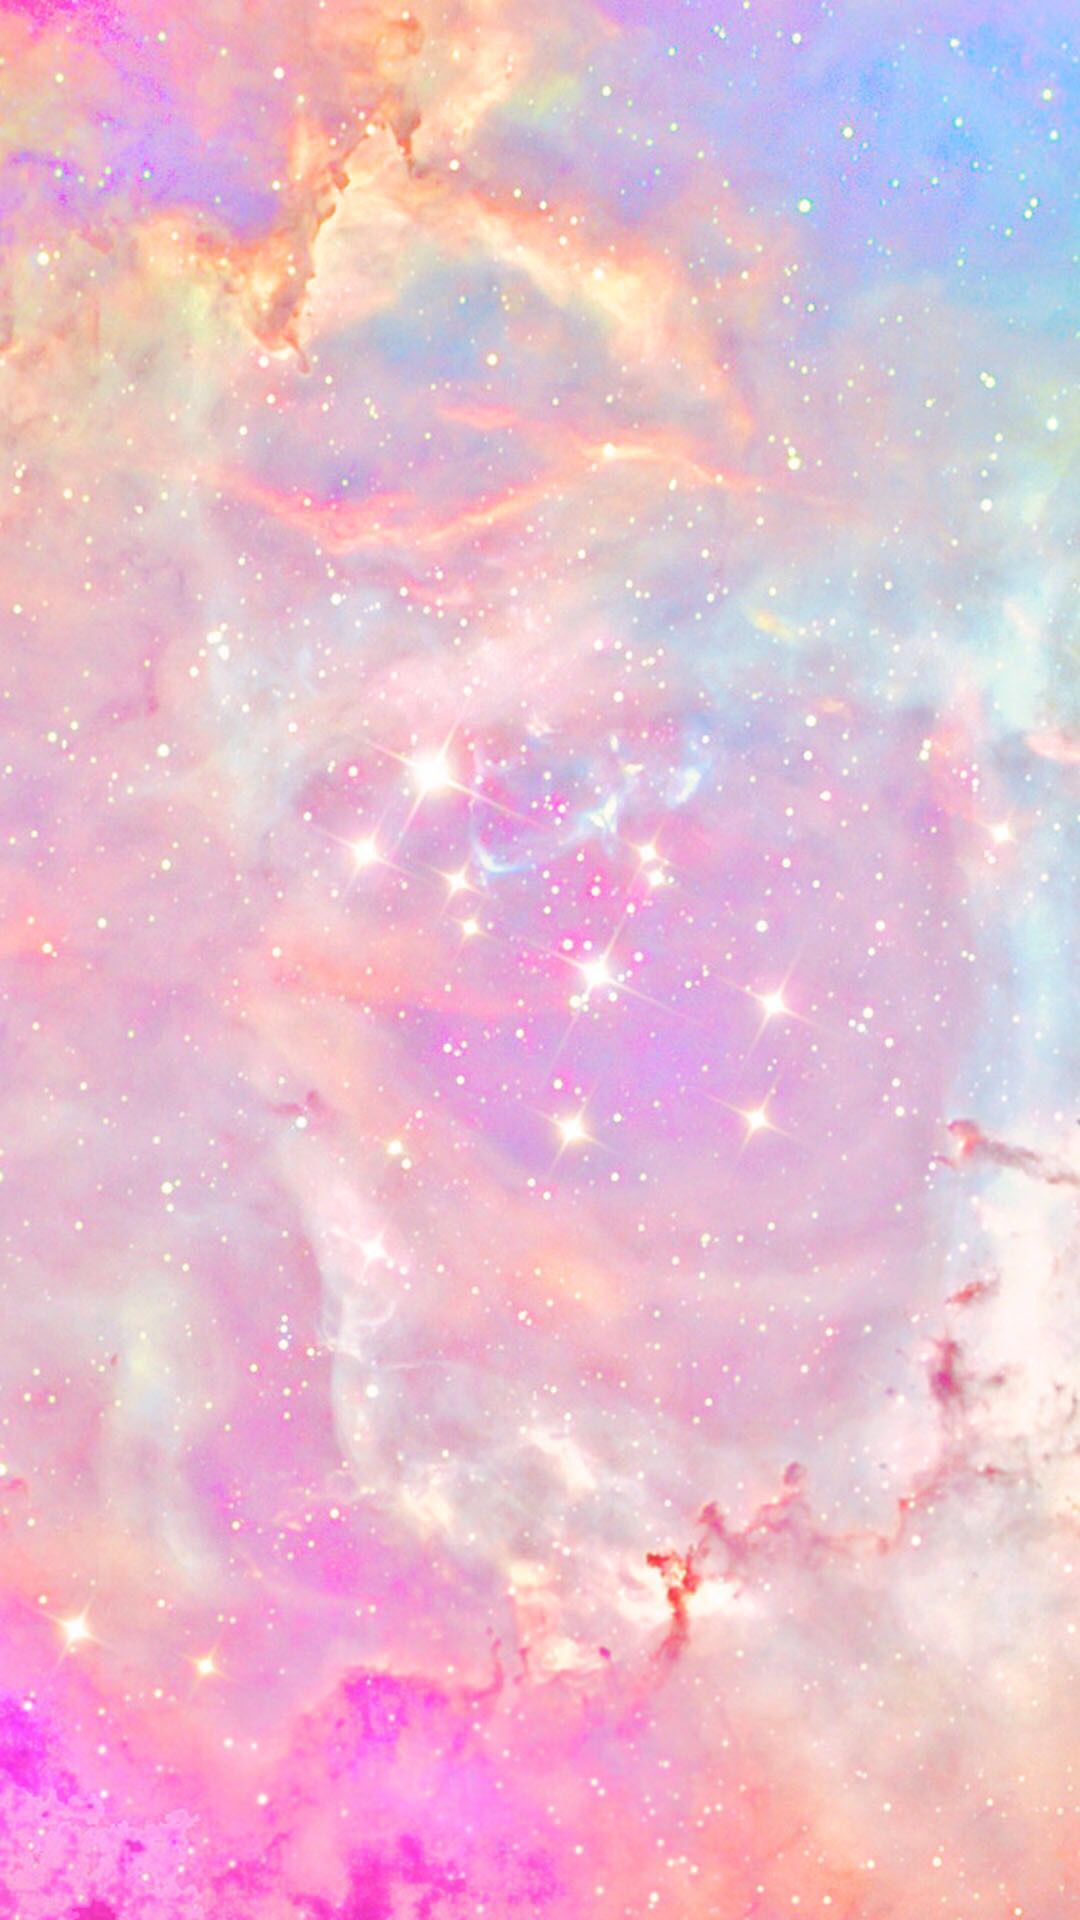 Girly outer space. Galaxy wallpaper iphone, Pink wallpaper iphone, Galaxy wallpaper